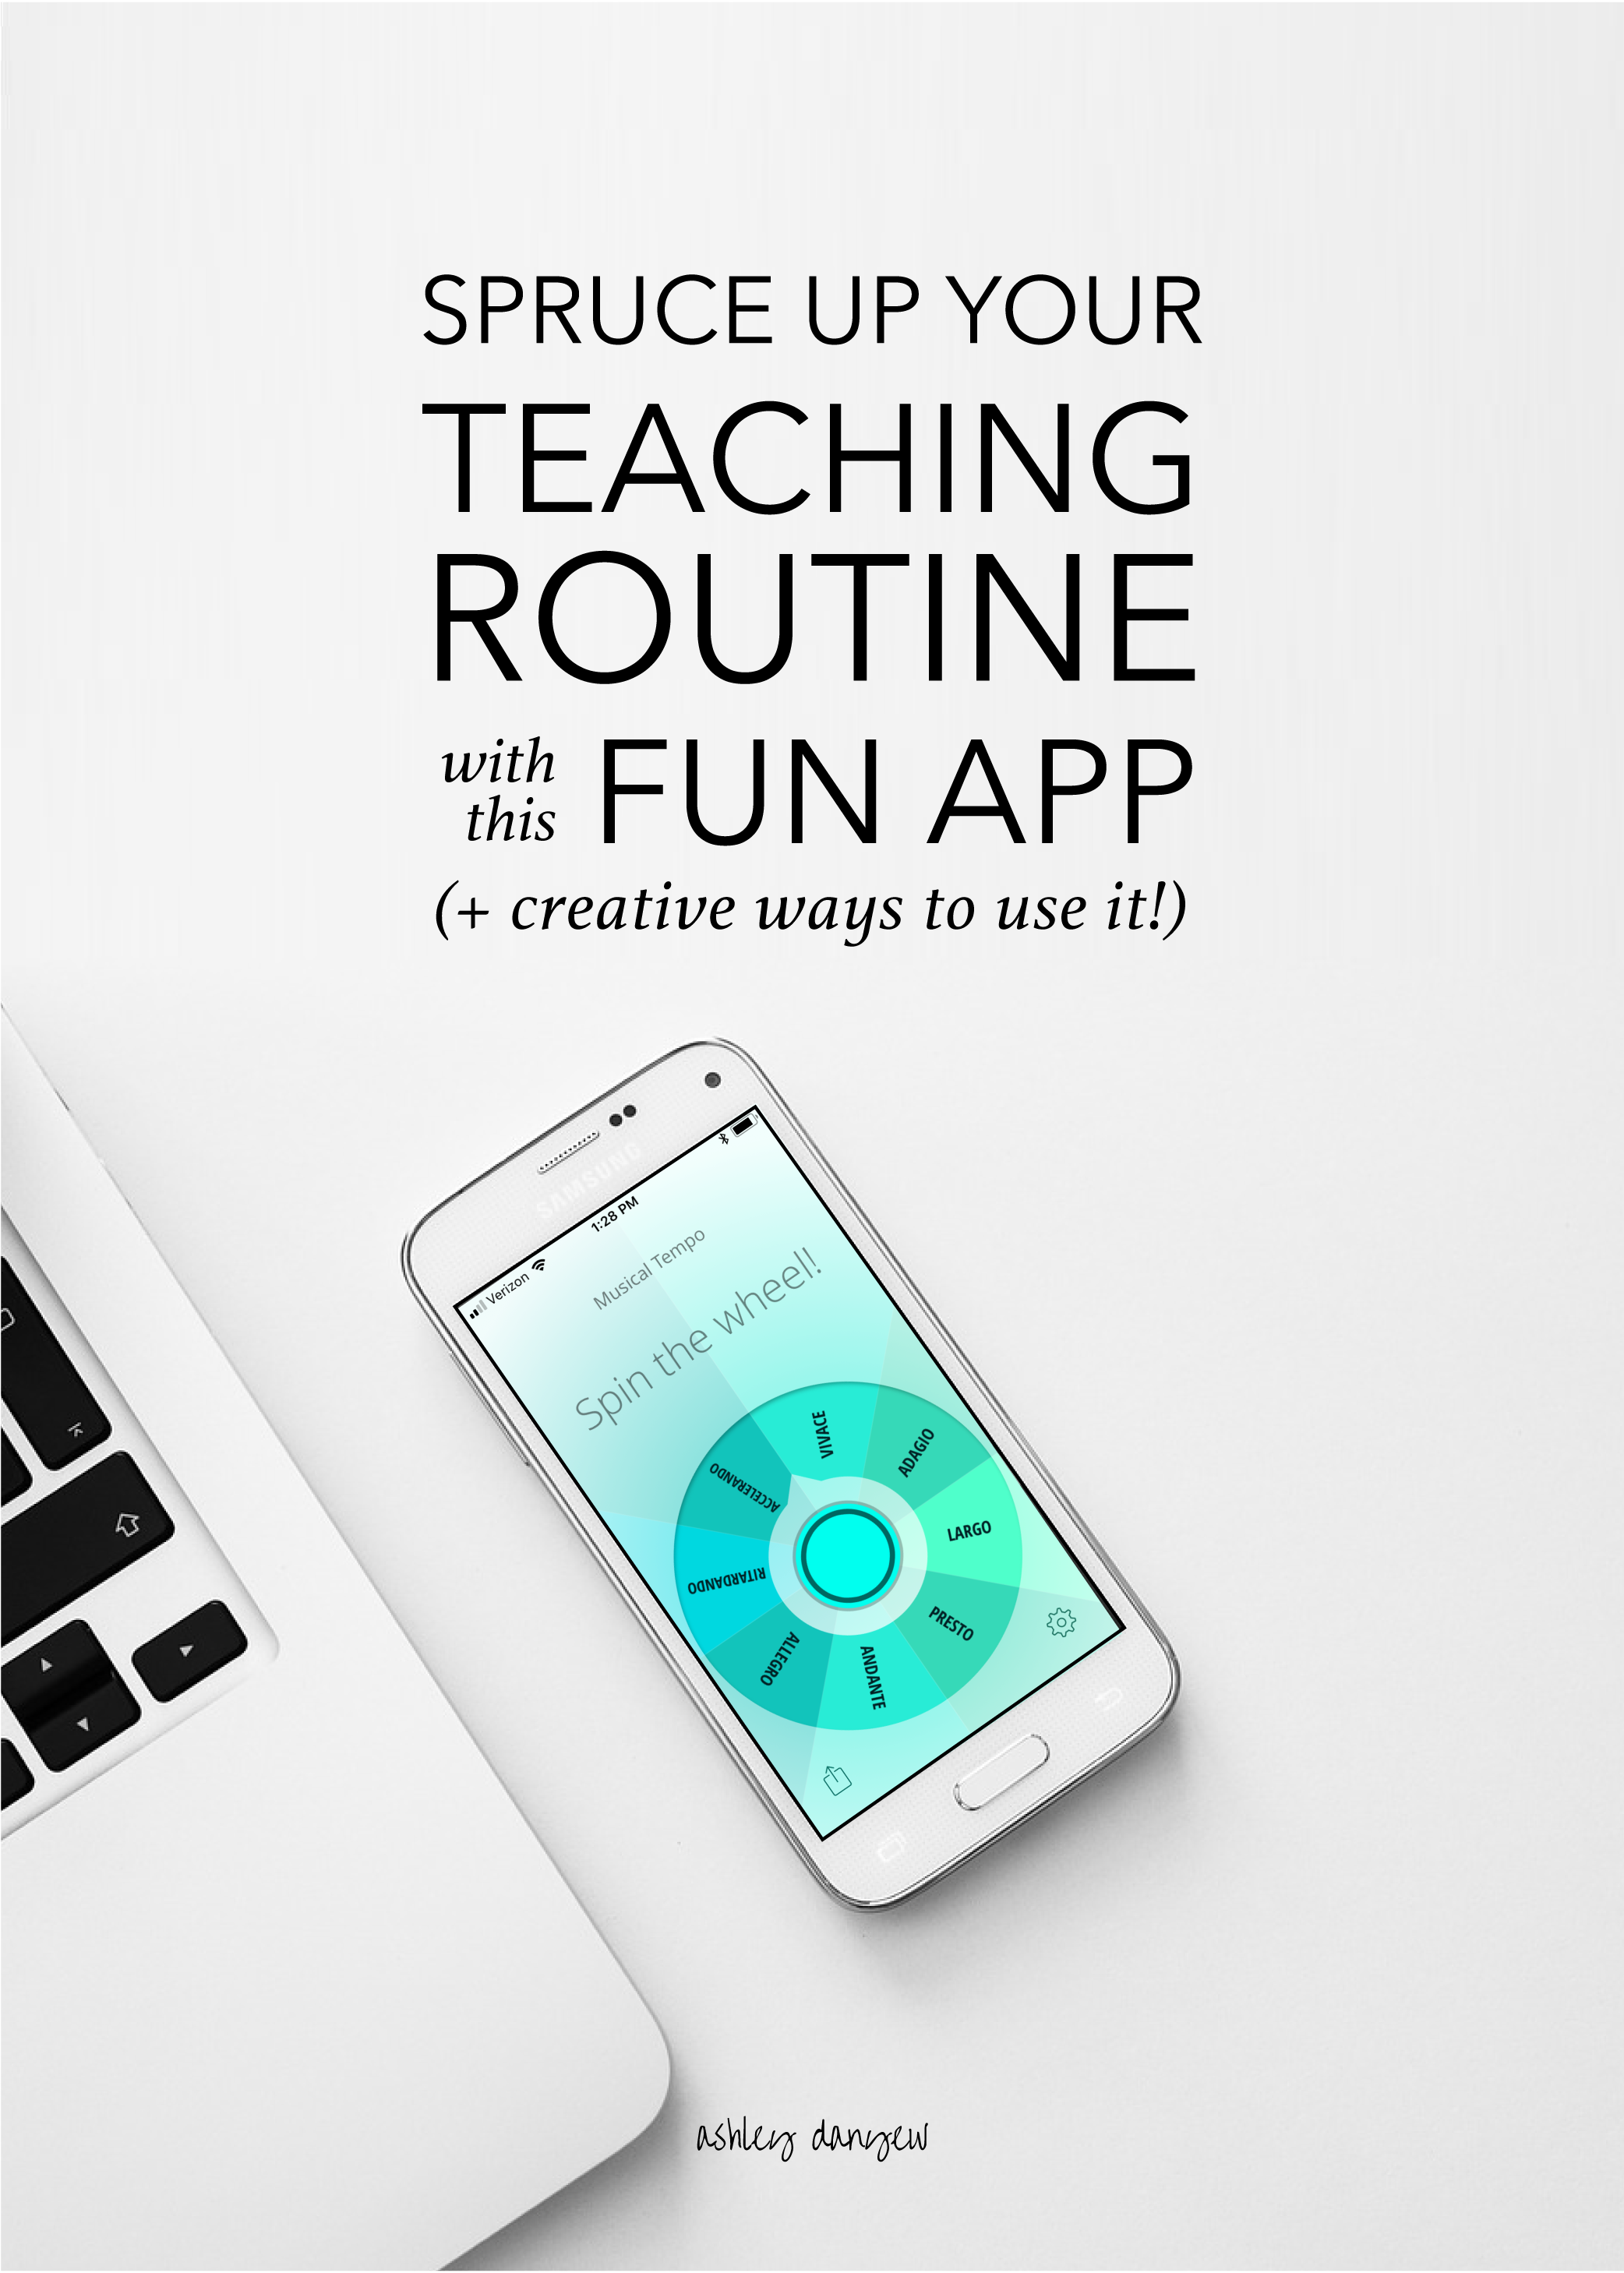 Copy of Spruce Up Your Teaching Routine with this Fun App (+ Creative Ways to Use It!)